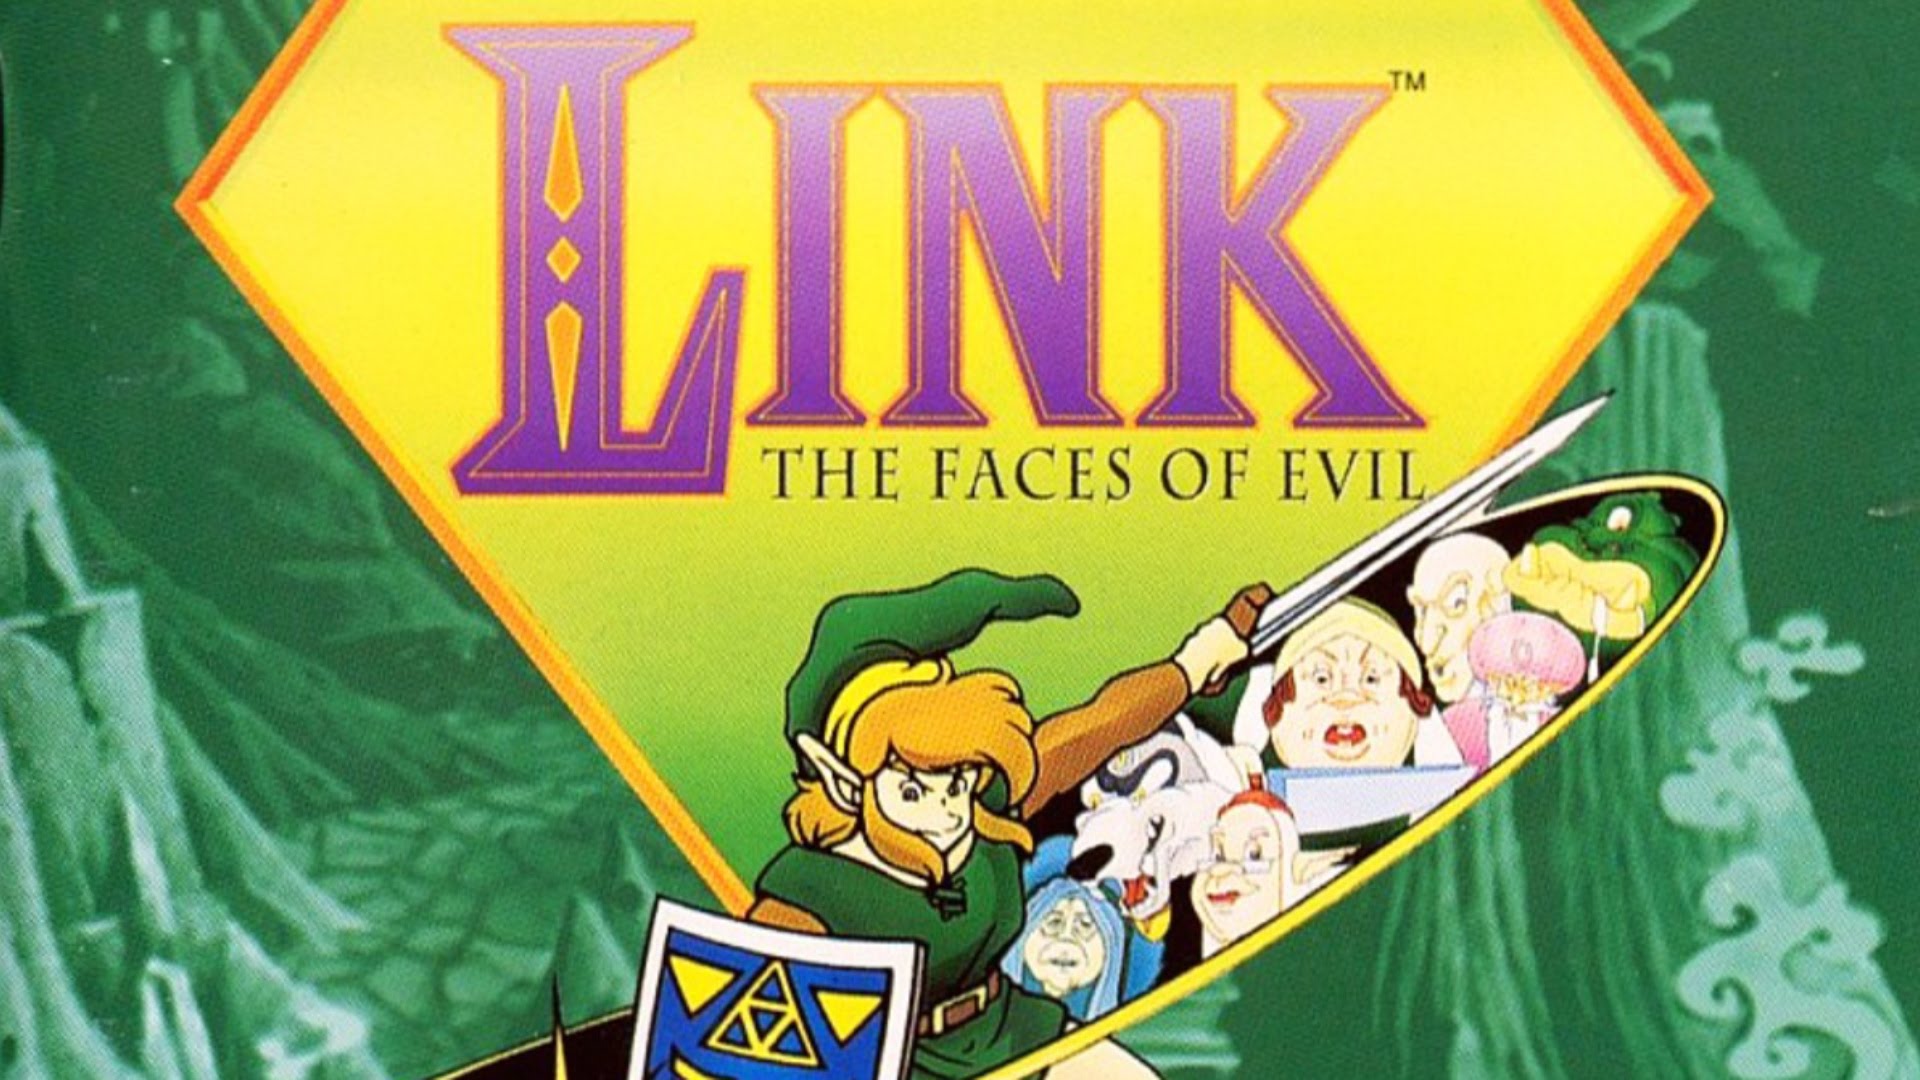 cool retro video games - link the faces of evil video game